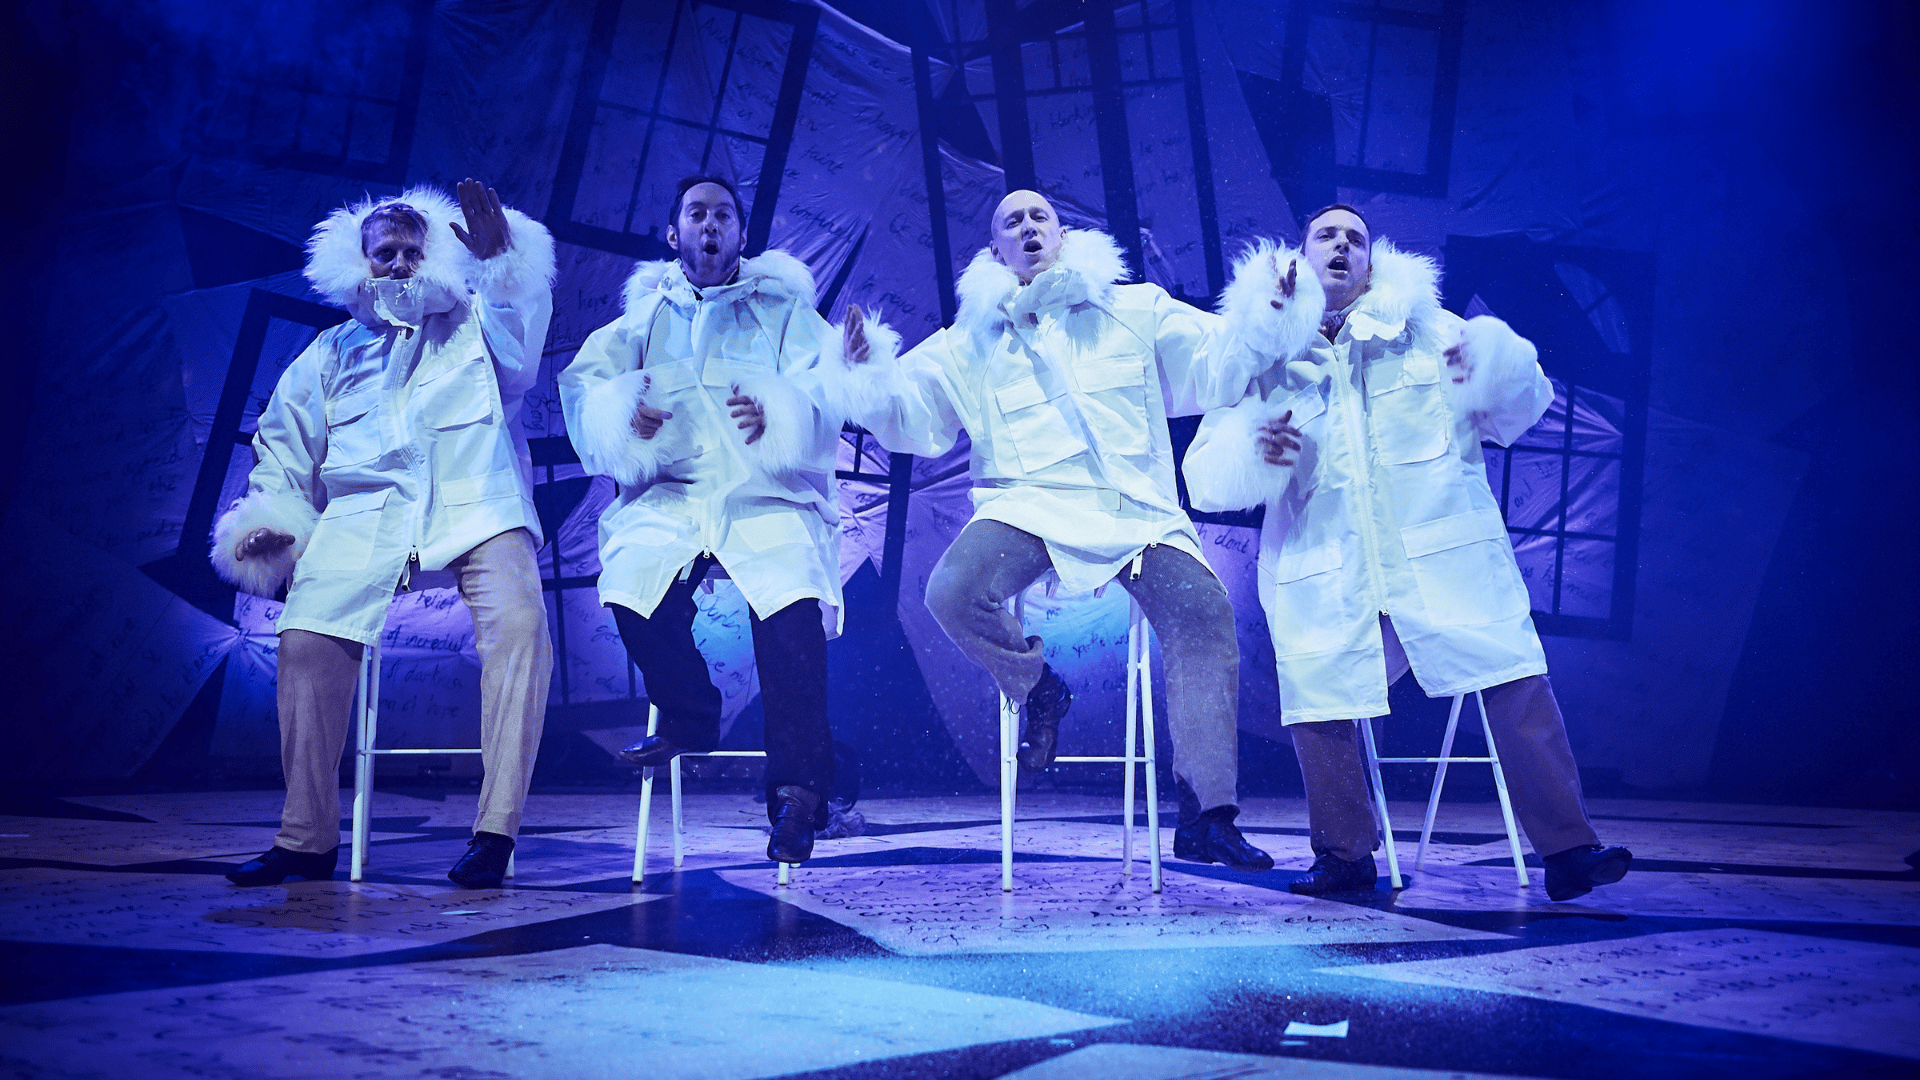 A Christmas Carol production shot: 4 characters sat on stool, wearing large white winter coats